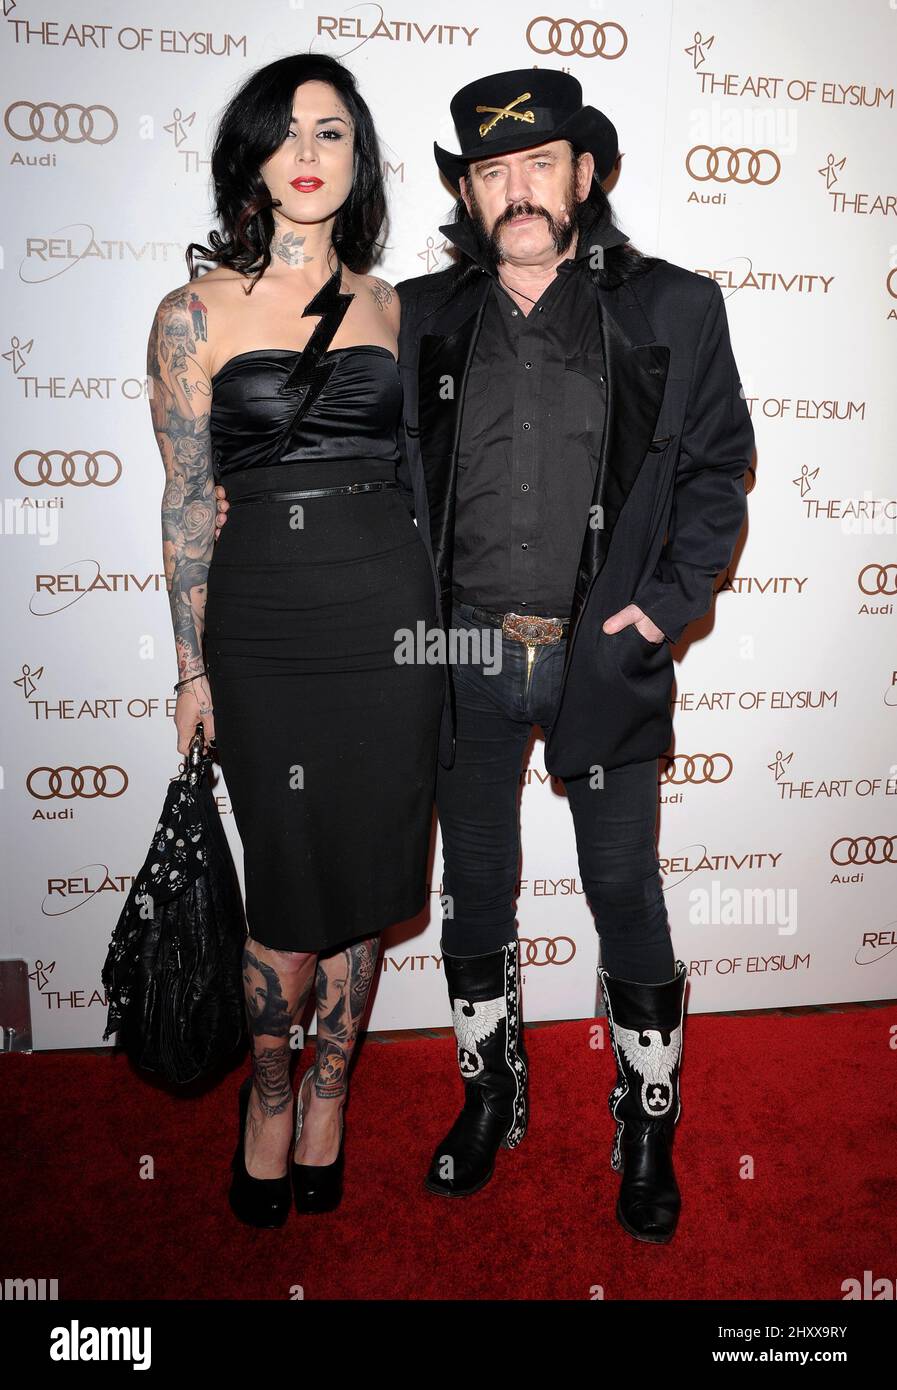 Kat Von D and Lemmy Kilmister at The Art of Elysium's 5th Annual Heaven Gala, held at the Historic Union on January 14, 2012, in Los Angeles Stock Photo - Alamy